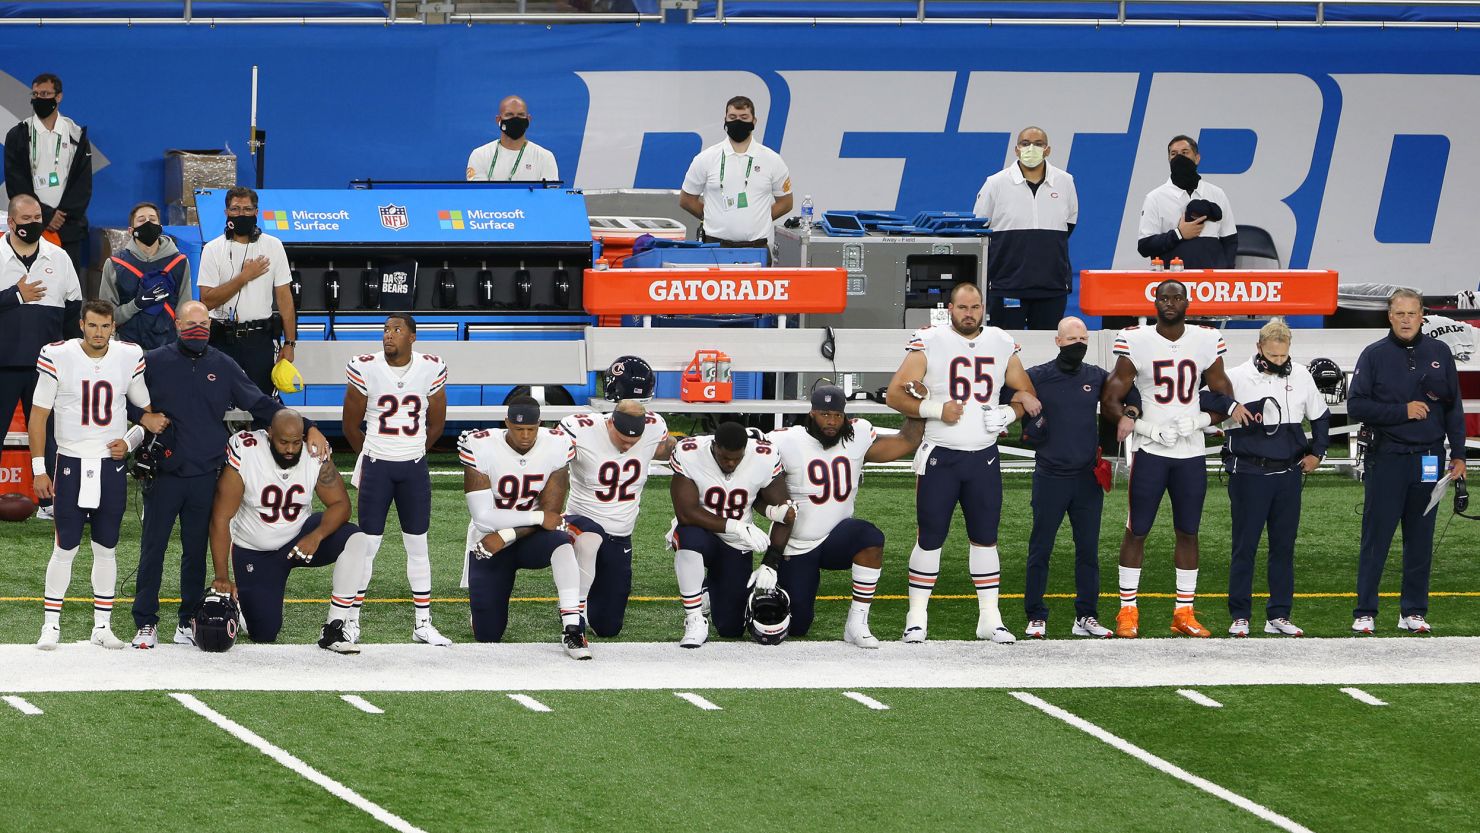 Chicago Bears players during the National Anthem before the first half of an NFL football game against the Detroit Lions in Detroit, Michigan, on Sunday, September 13.